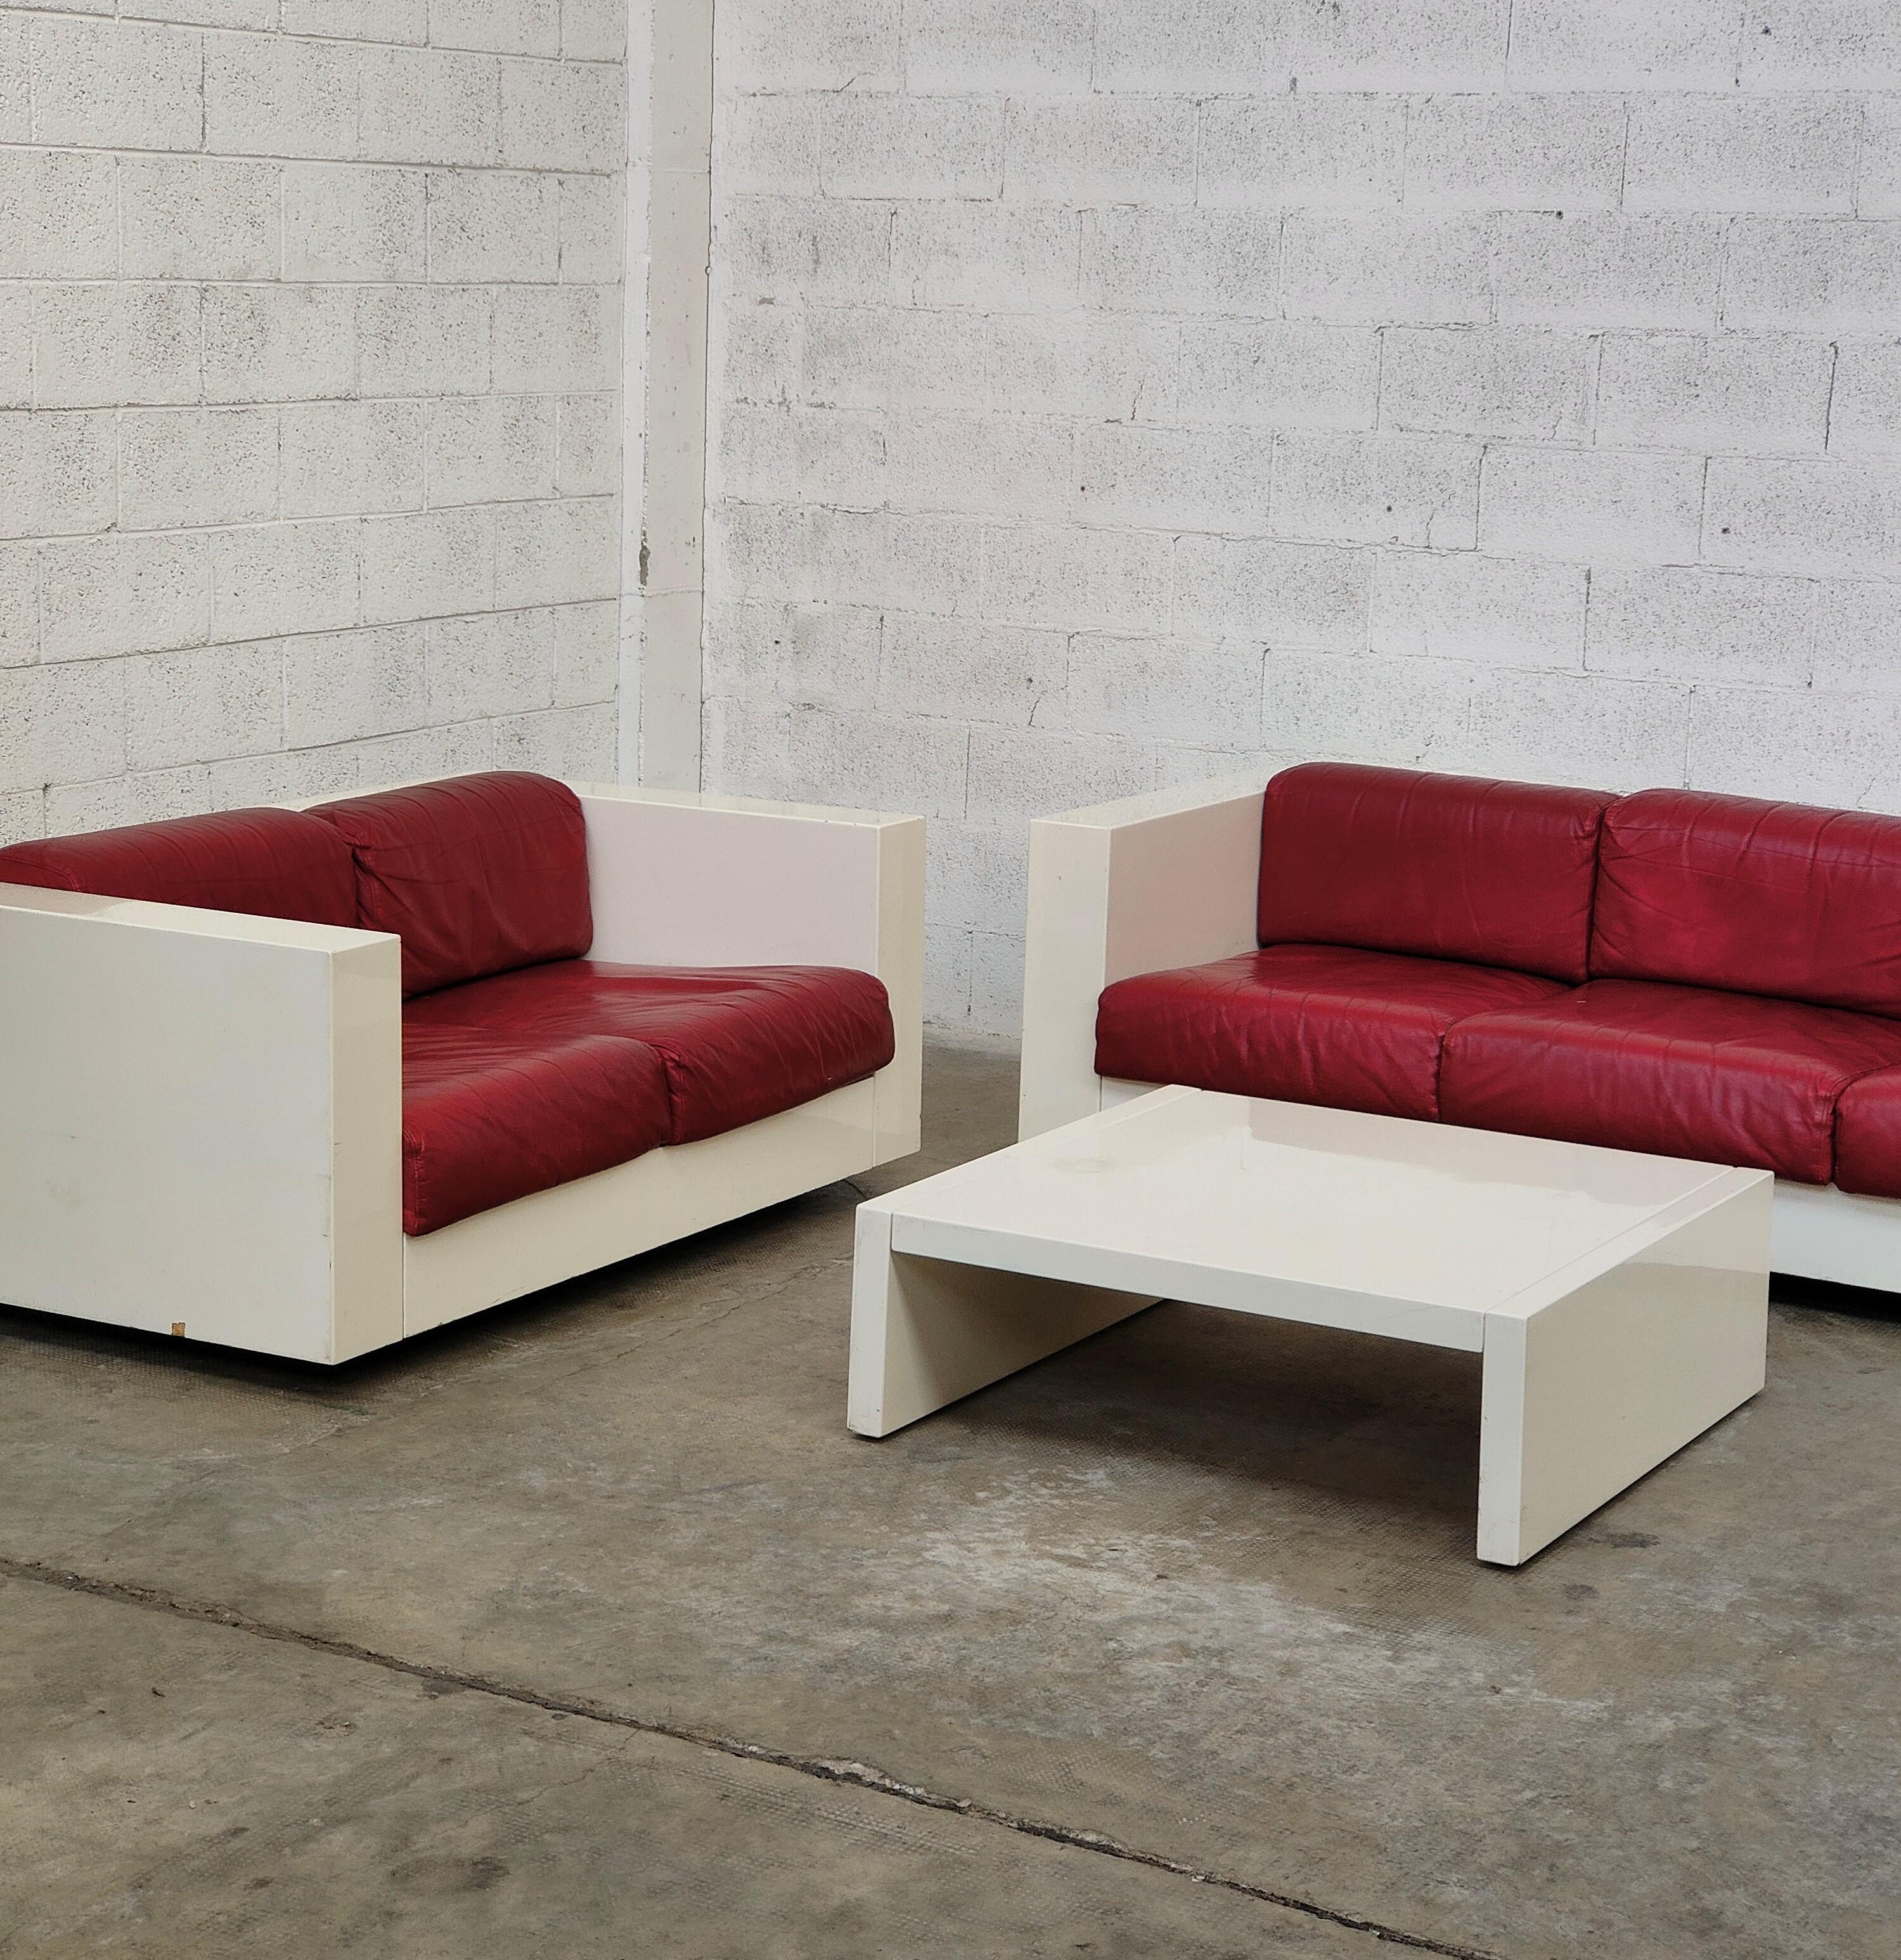 Exceptional Saratoga set designed by Massimo and Lella Vignella, produced by Poltronova, Italy 1960s.
A beautiful living room set composed of two sofas (three-seater/two-seater) and a coffee table model Saratoga.
The sofas present a white